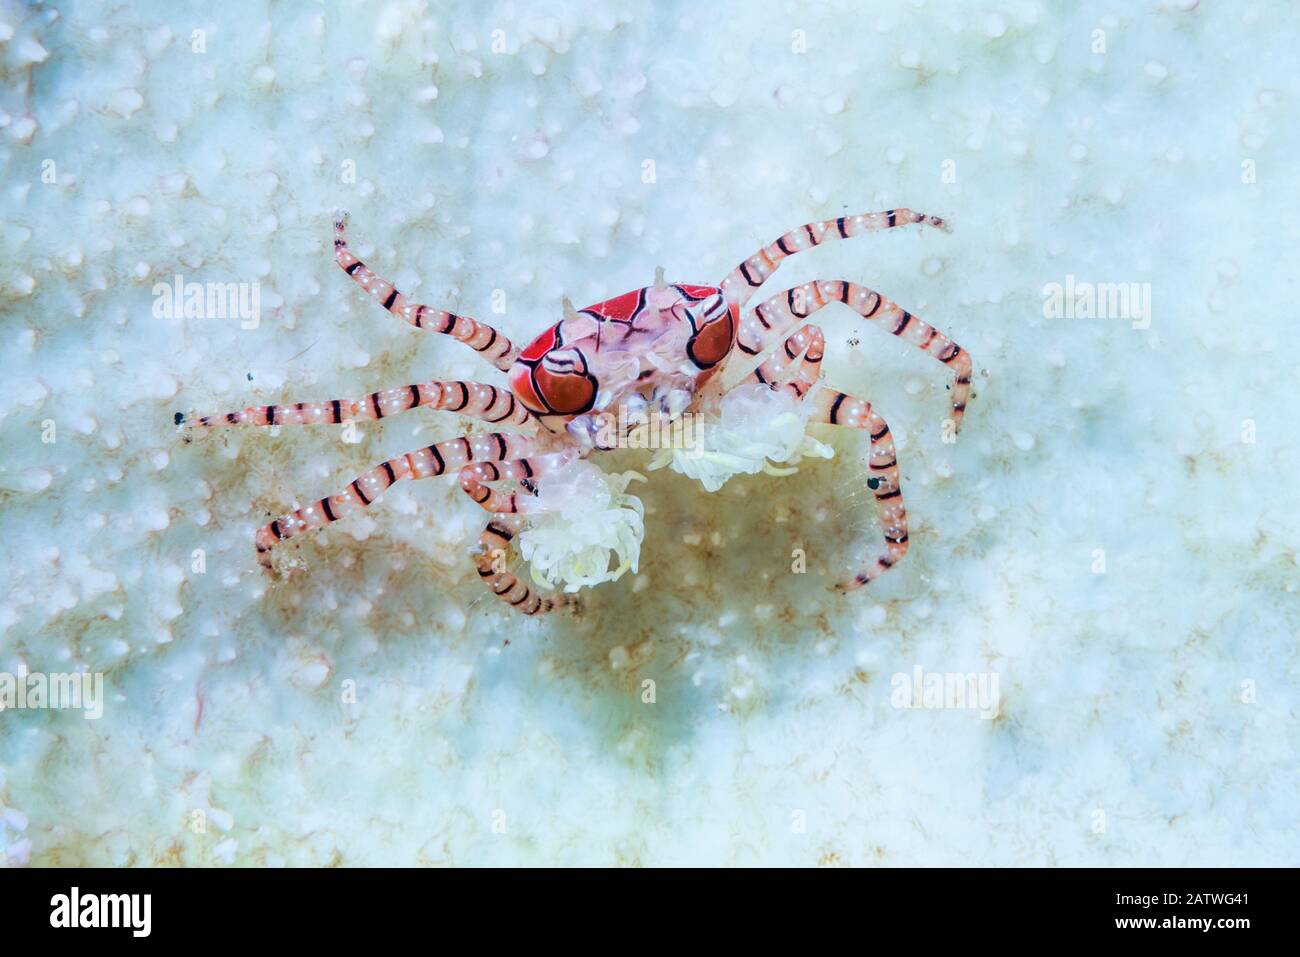 Boxer Crab (Lybia tessellata) with sea anemones in its claws for defense. Lembeh Strait, North Sulawesi, Indonesia. Stock Photo